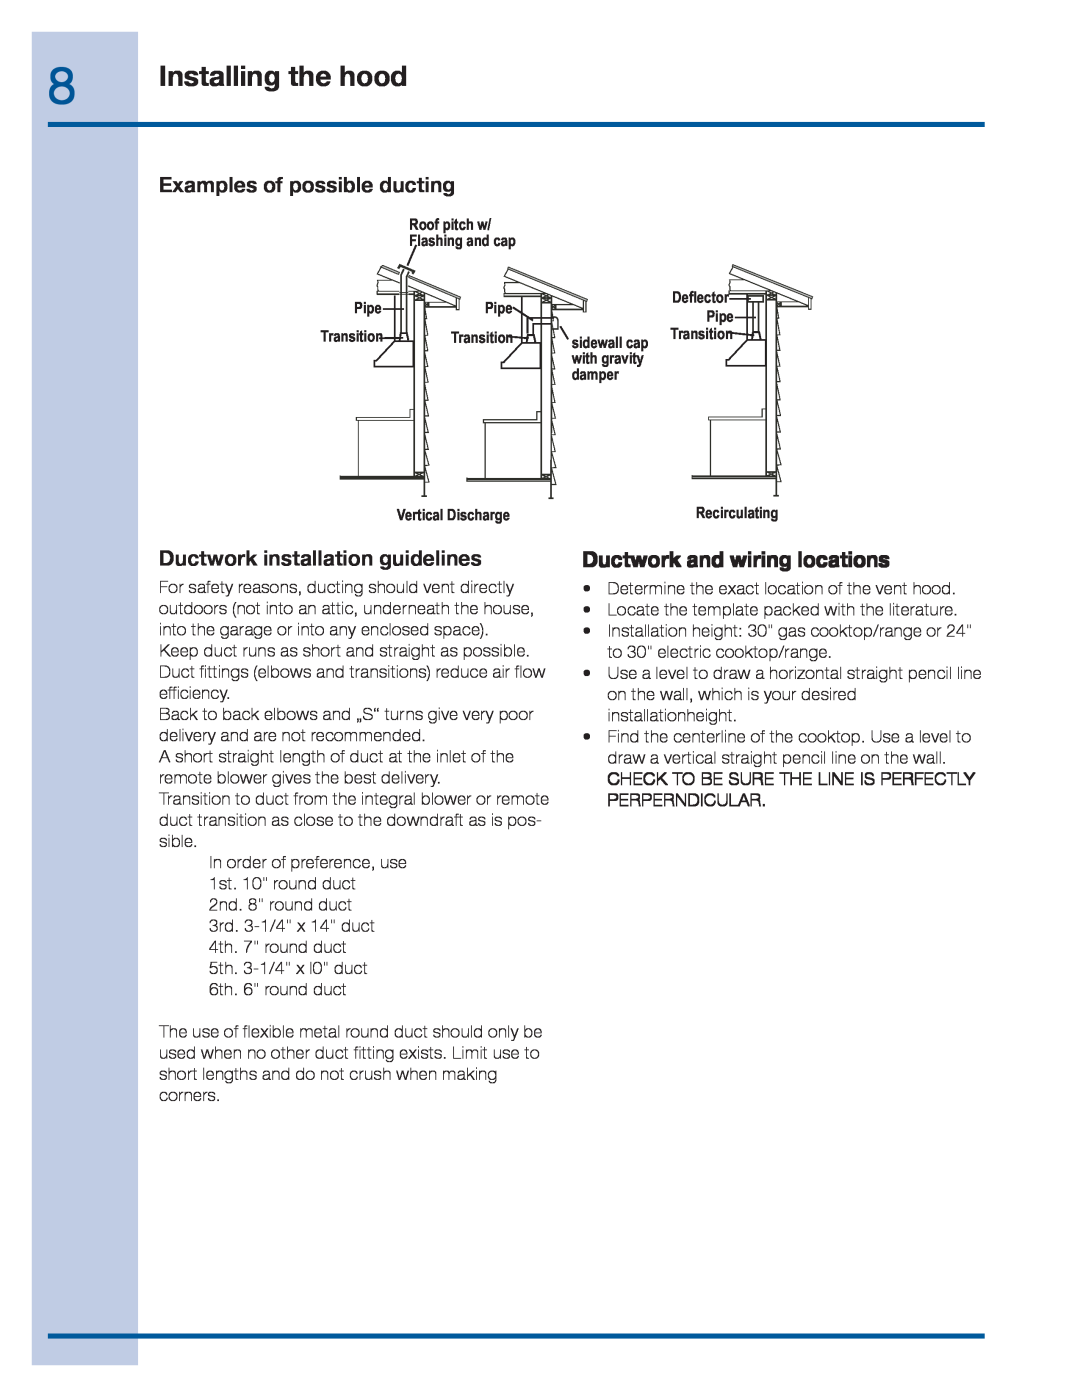 Frigidaire EI36WC55GS manual Examples of possible ducting, Ductwork installation guidelines, Ductwork and wiring locations 